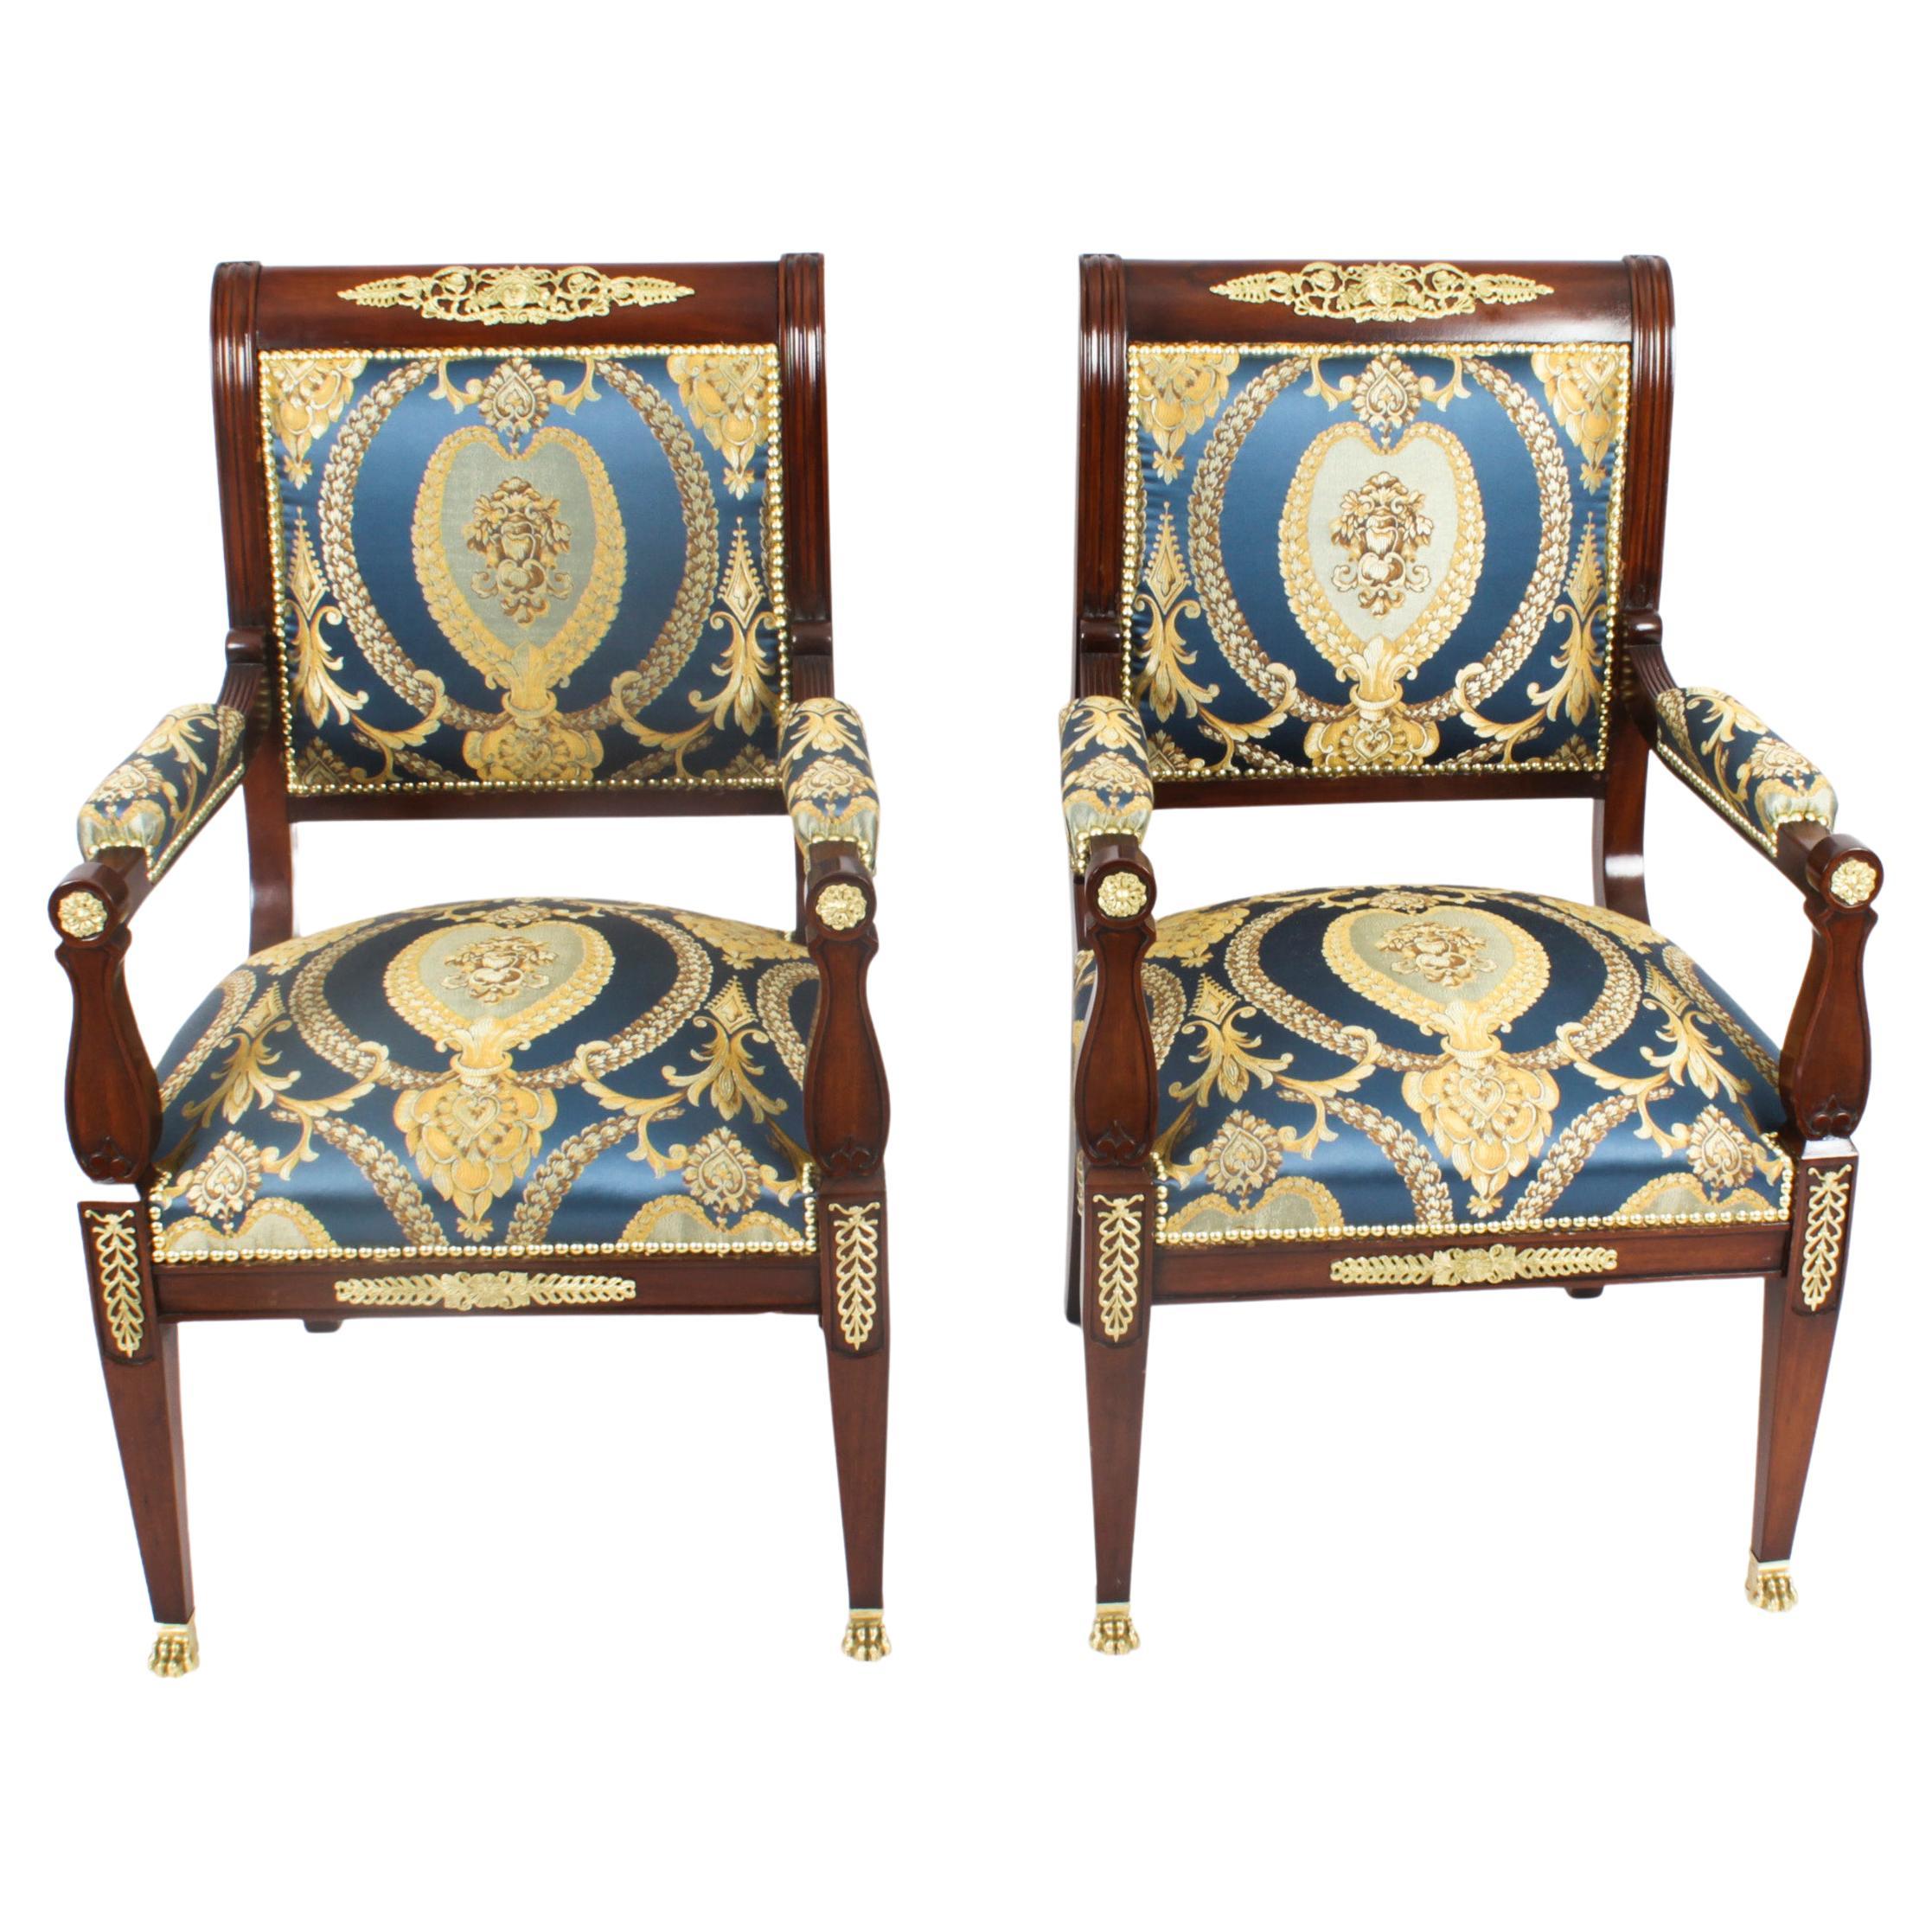 Antique Pair French Empire Revival Ormolu Mounted Armchairs 19th Century